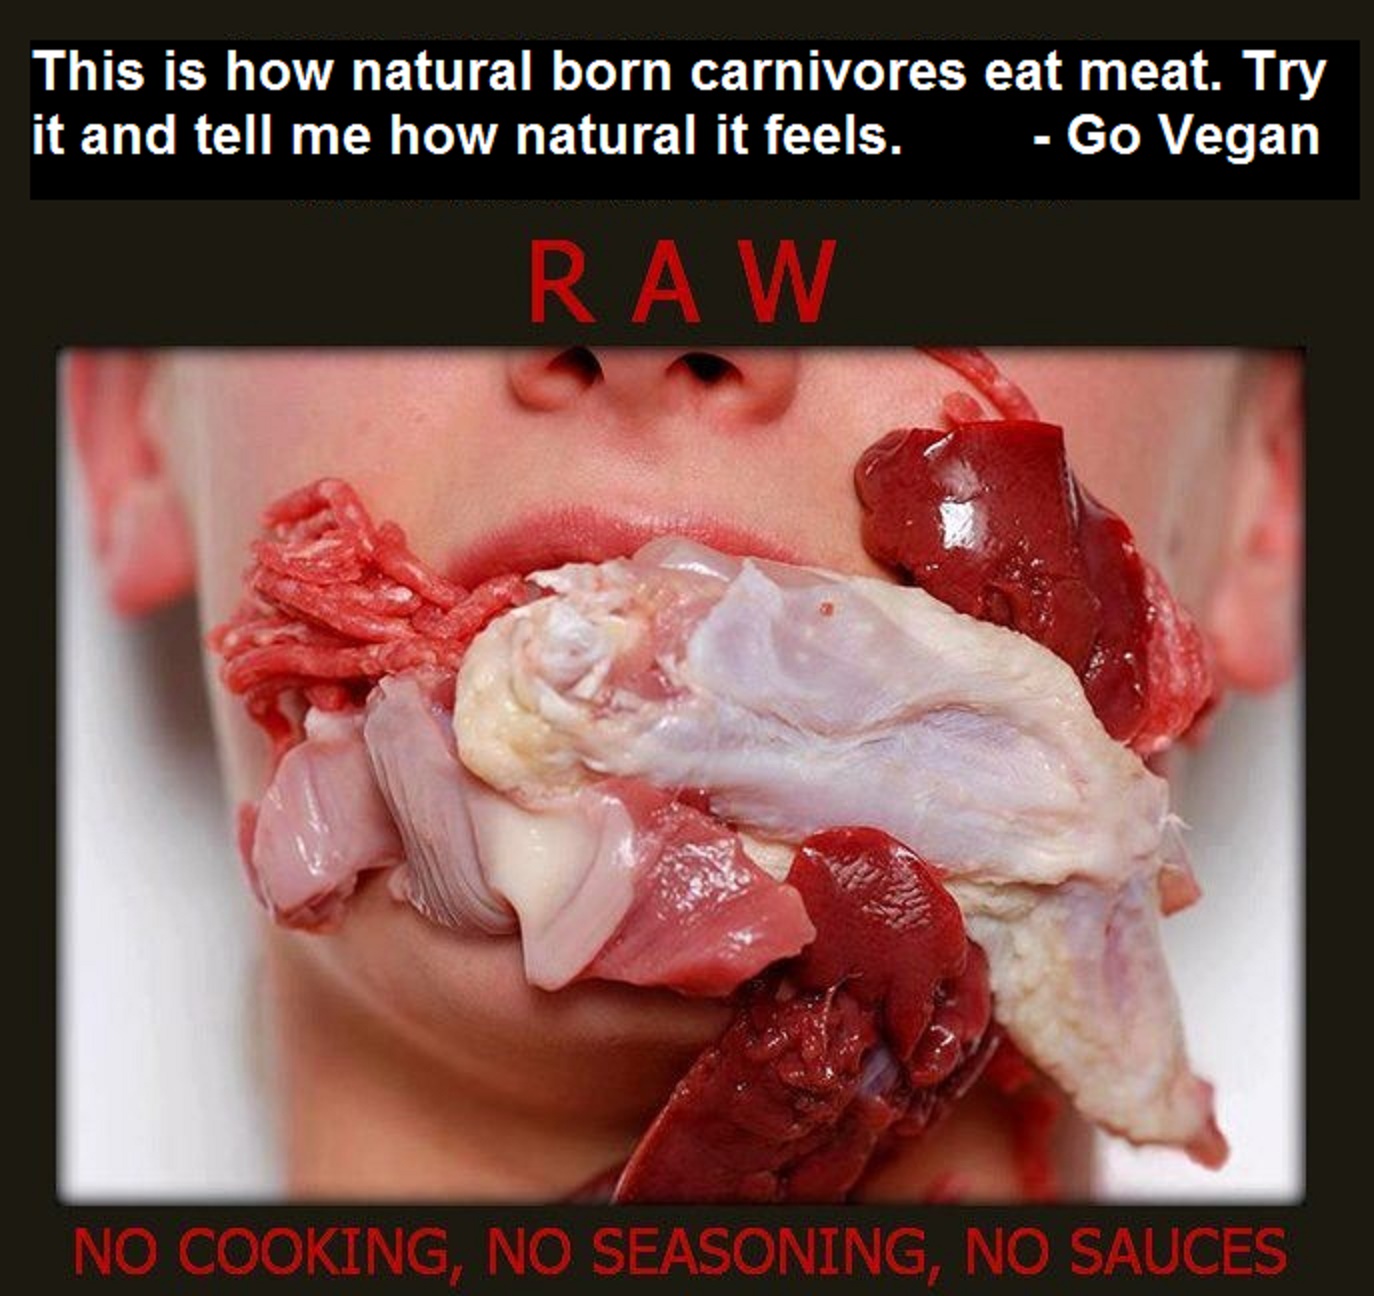 This is how natural born carnivores eat meat. Try it and tell me how natural it feels. - Go Vegan